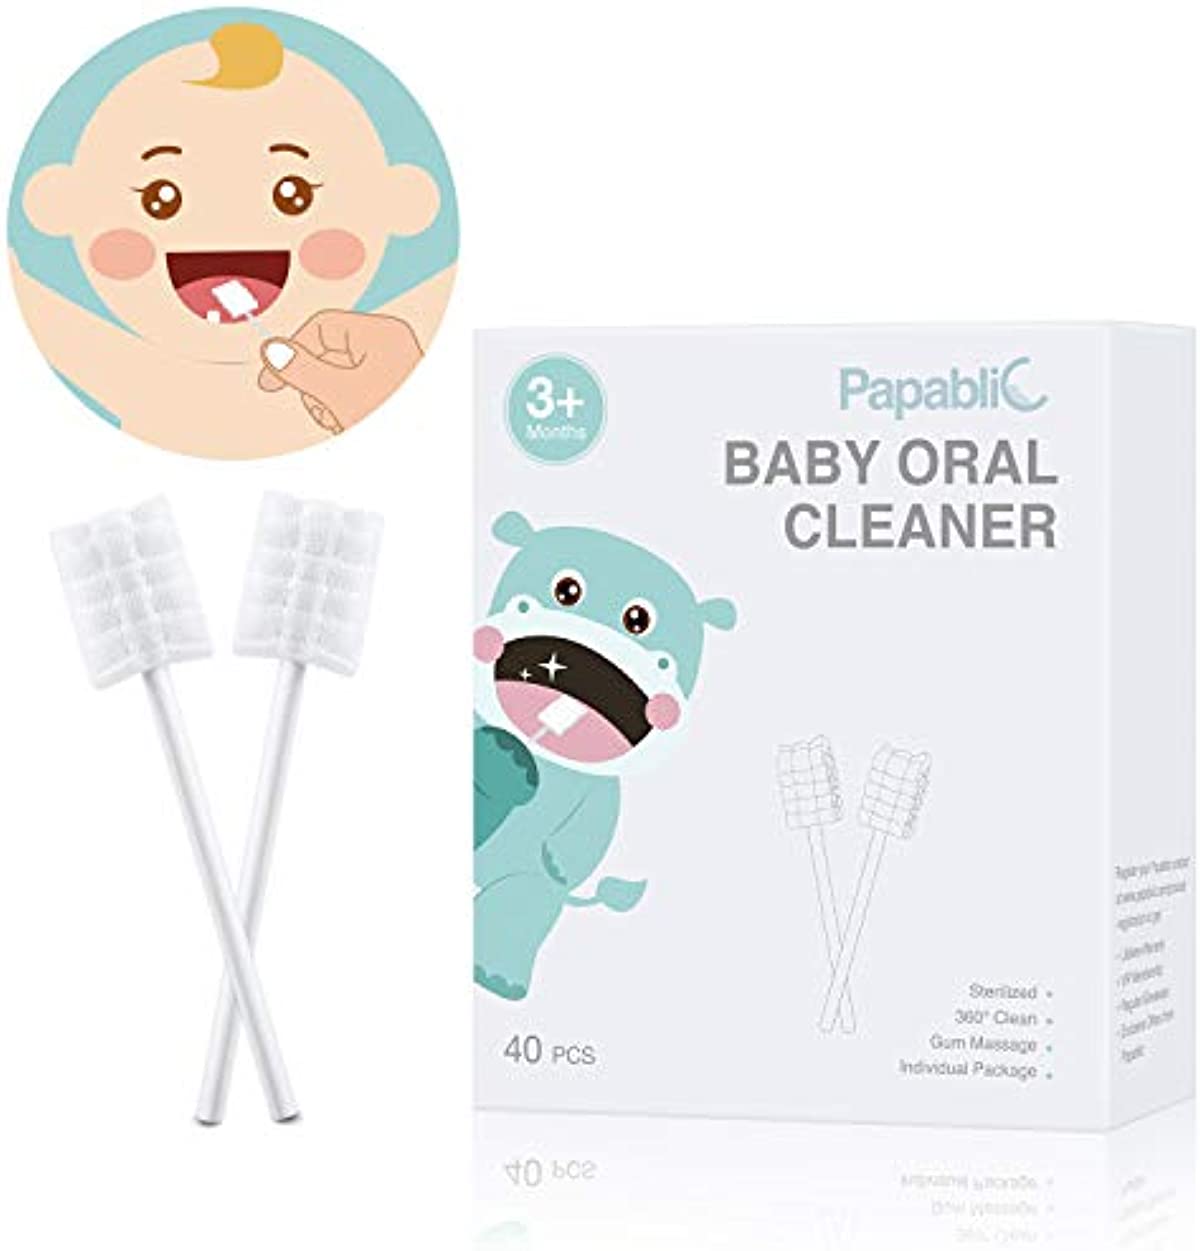 [40-Pack] Papablic Baby Tongue Cleaner, Upgrade Gum Cleaner with Paper Handle for Babies and Infants Ages 0-2 Years